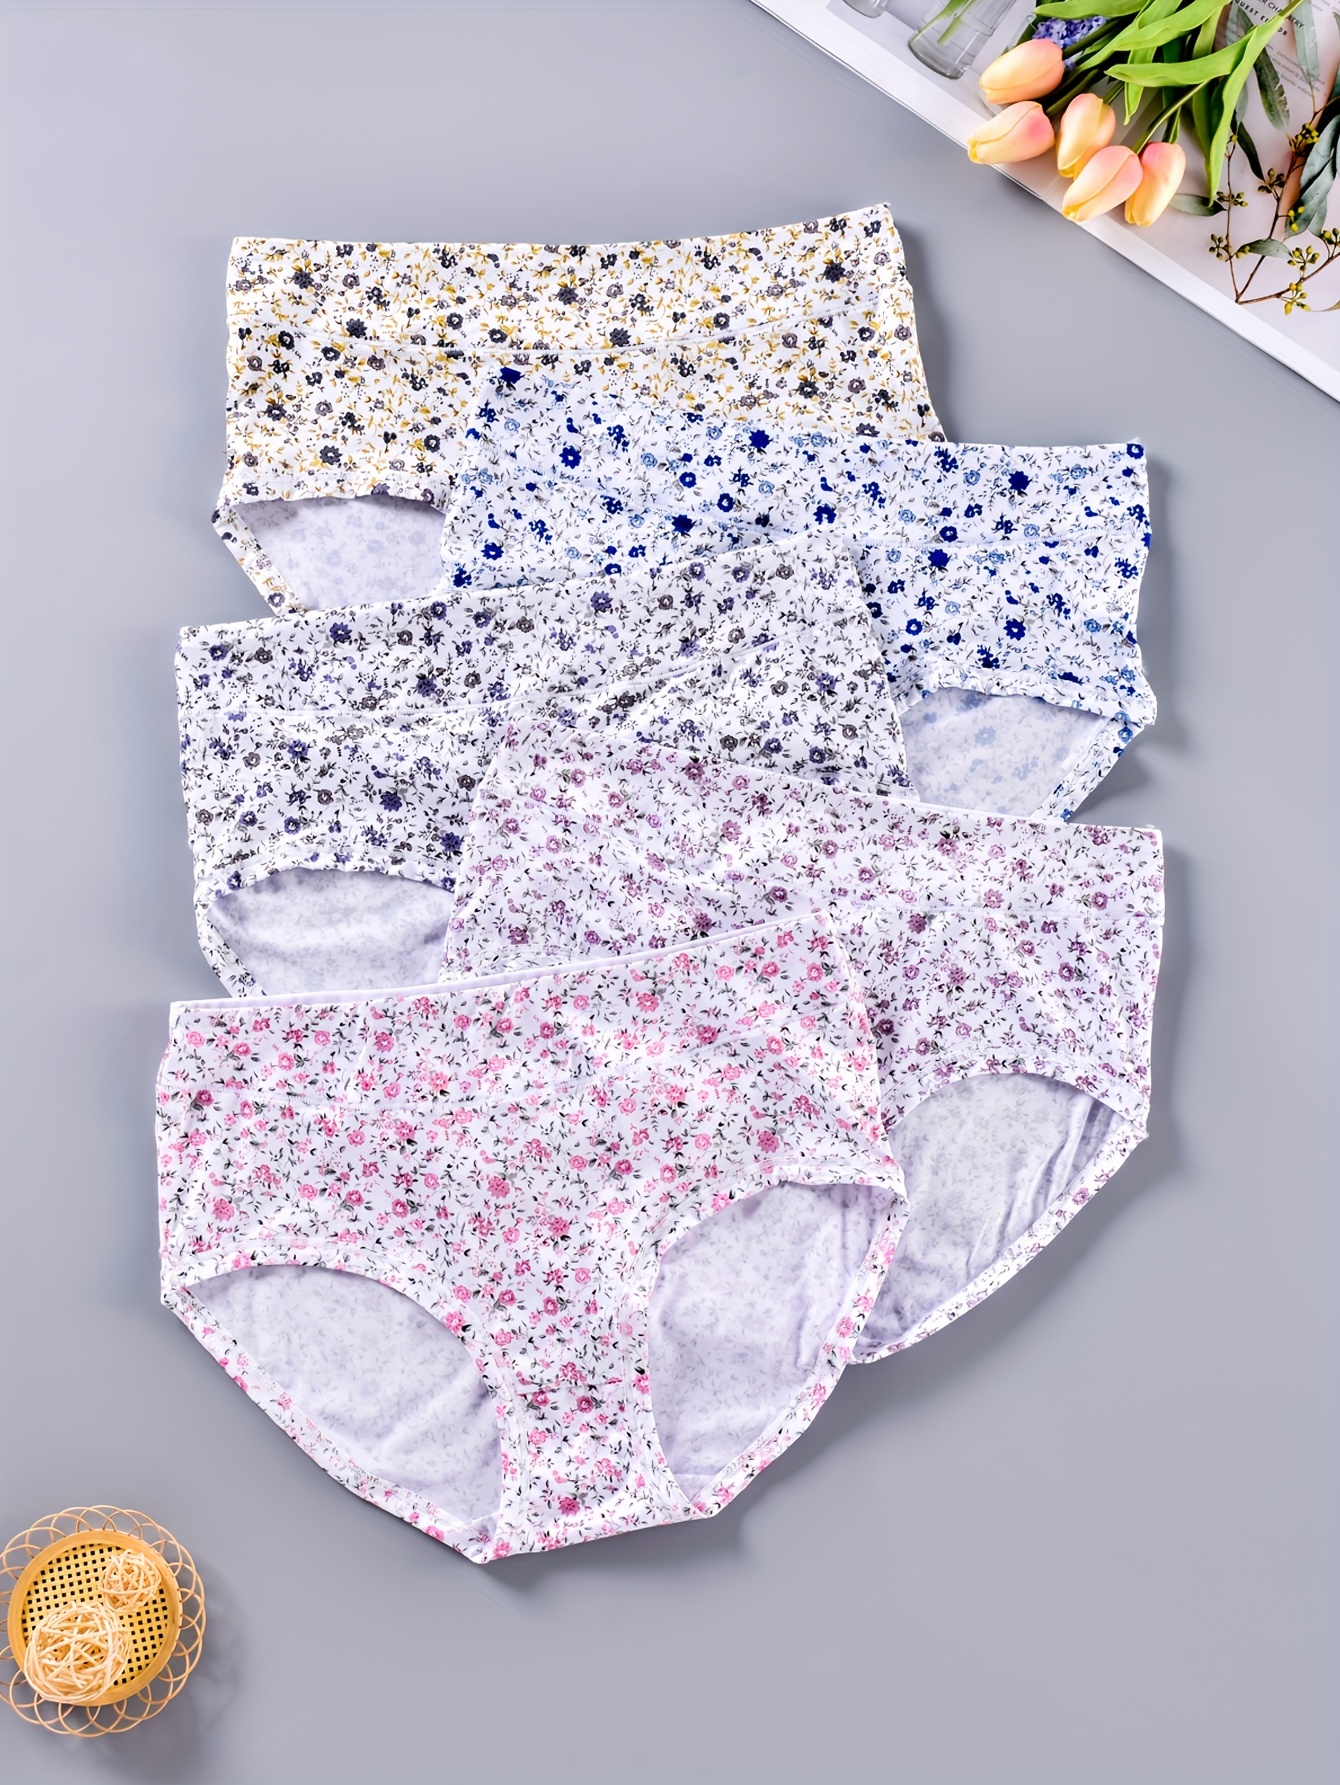 Women's High Waisted Cotton Underwear Lace Ladies Soft Briefs Panties 5 Pack